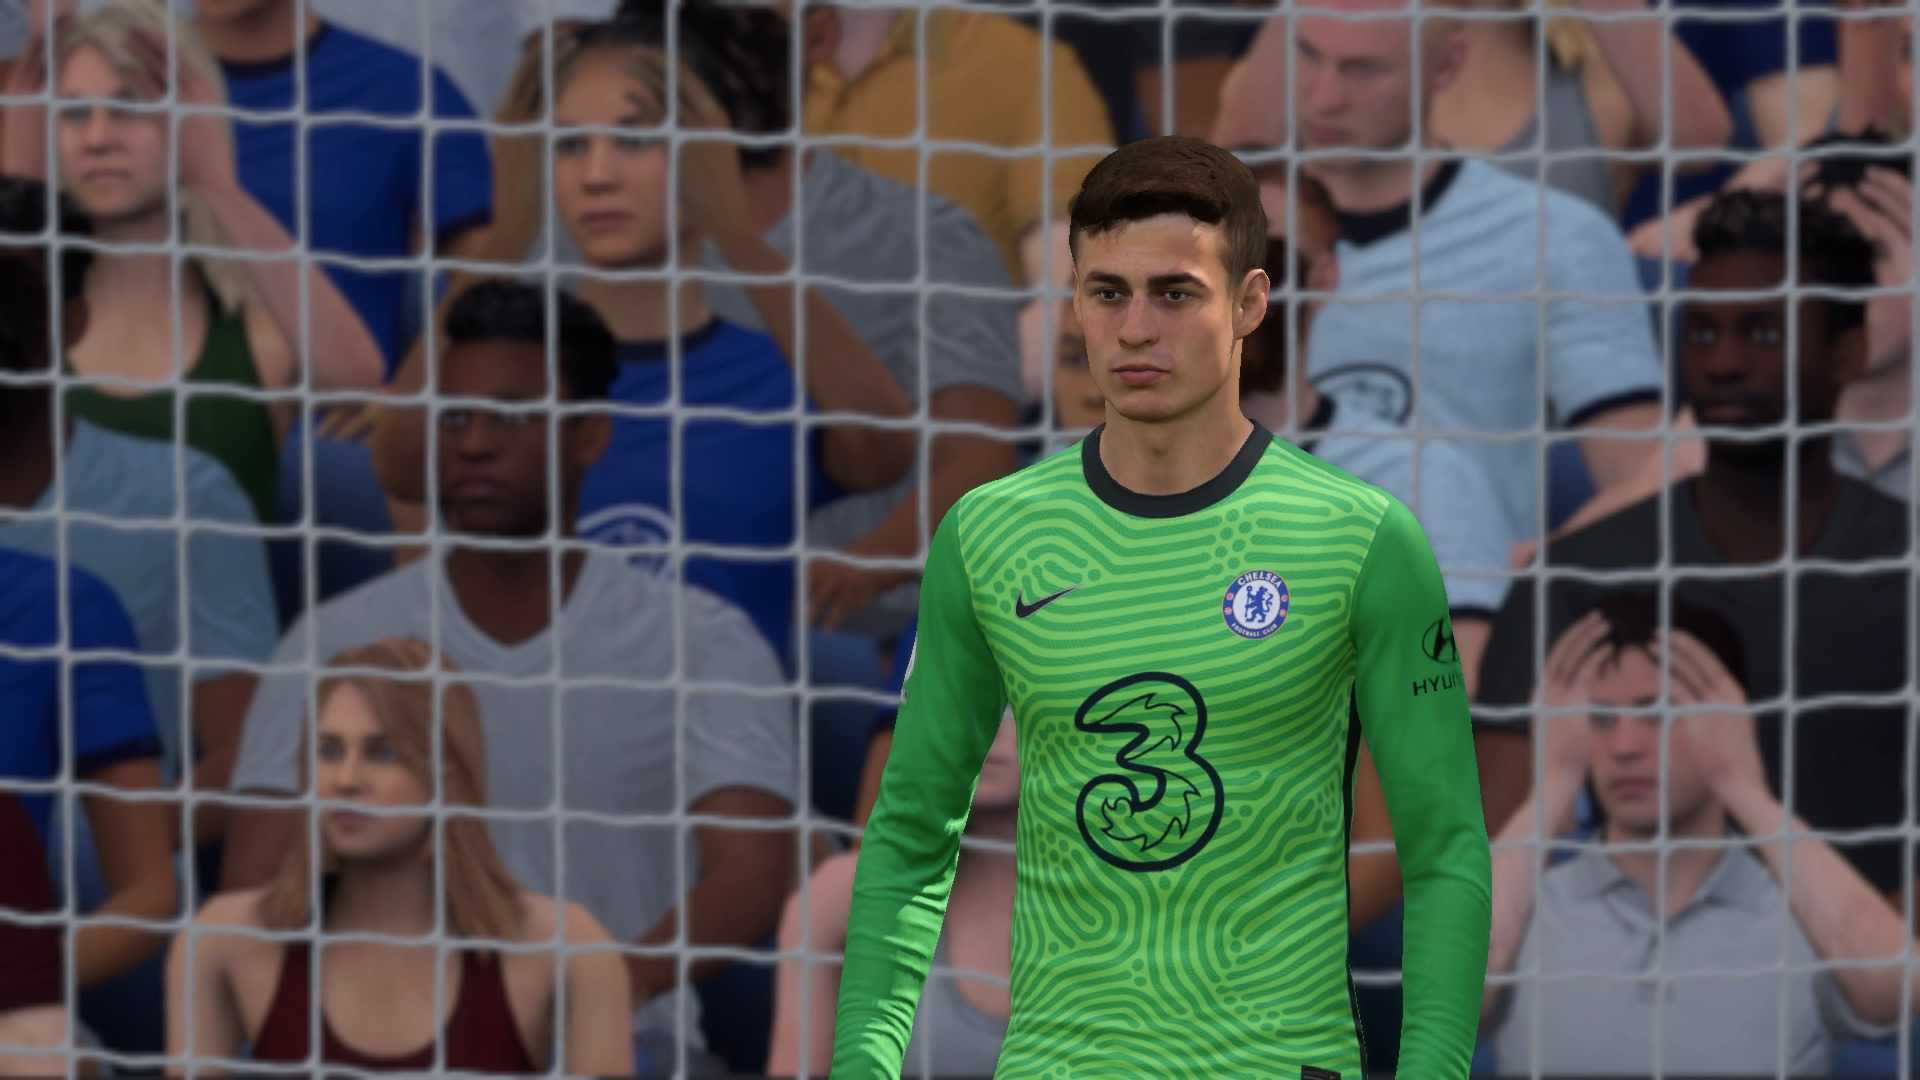 FIFA 22 best keepers: Courtois stands in the goal in a green Chelsea keepers strip.